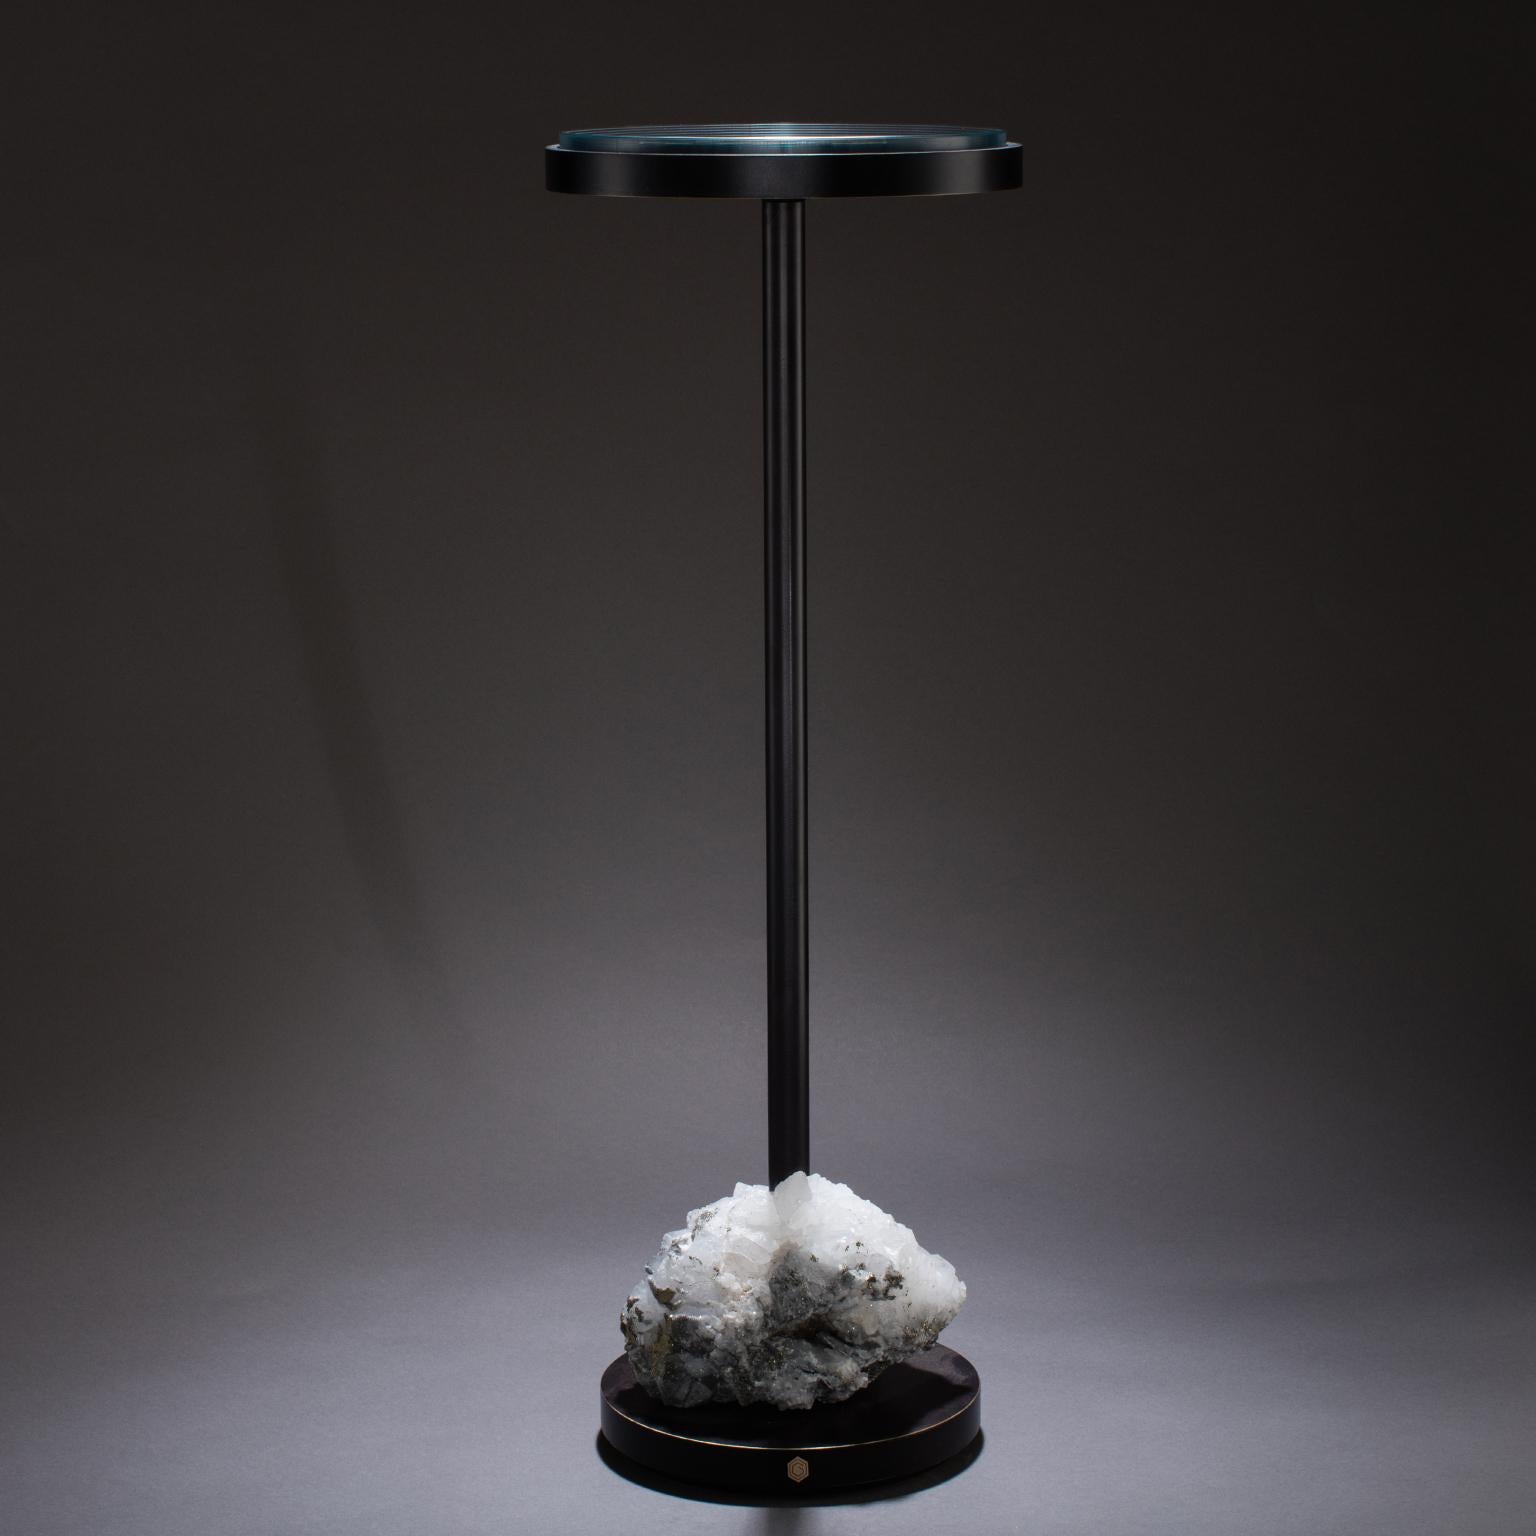 Studio Greytak 'Havana Table 5' Quartz, Mica, and Oil Rubbed Bronze In New Condition For Sale In Missoula, MT